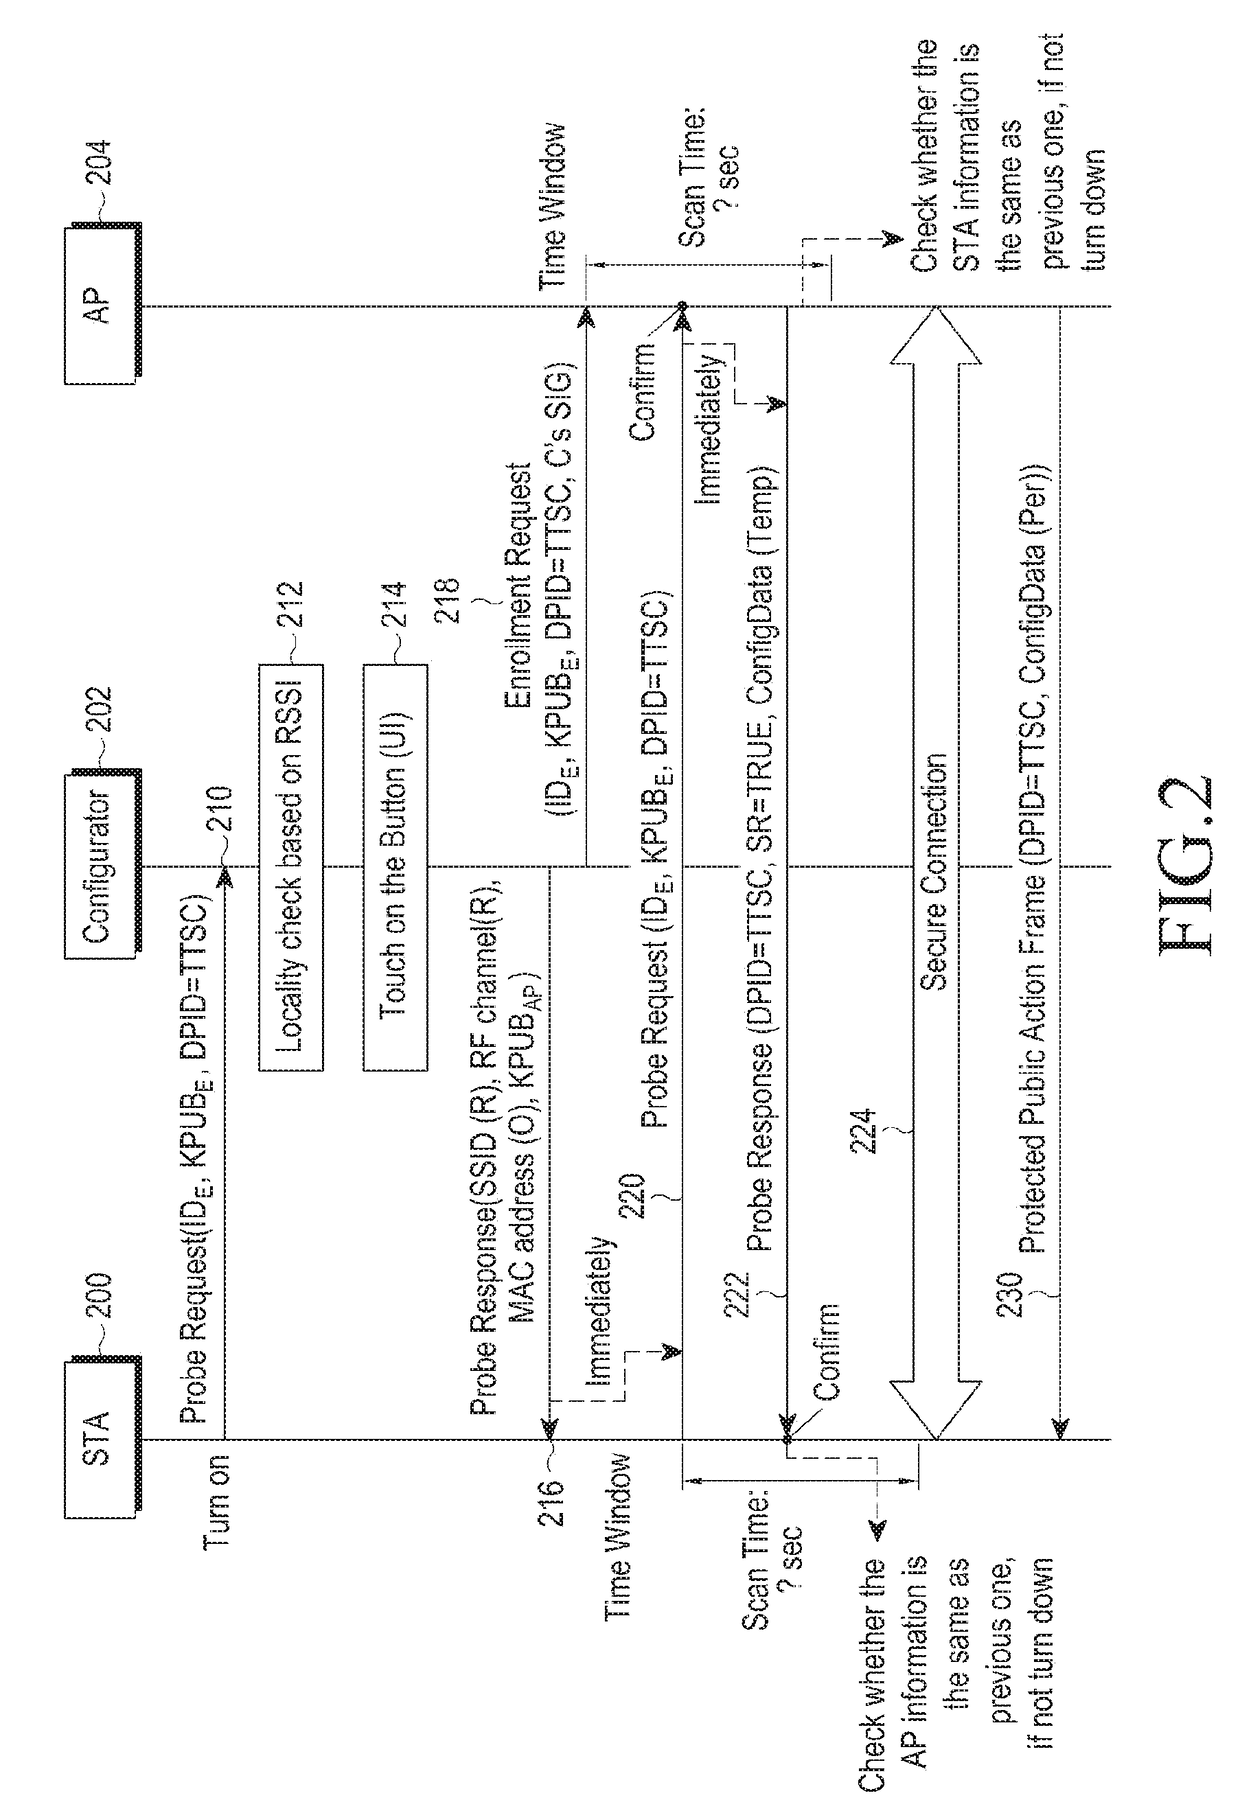 Technique for supporting initial setup between connection request device and connection acceptance device